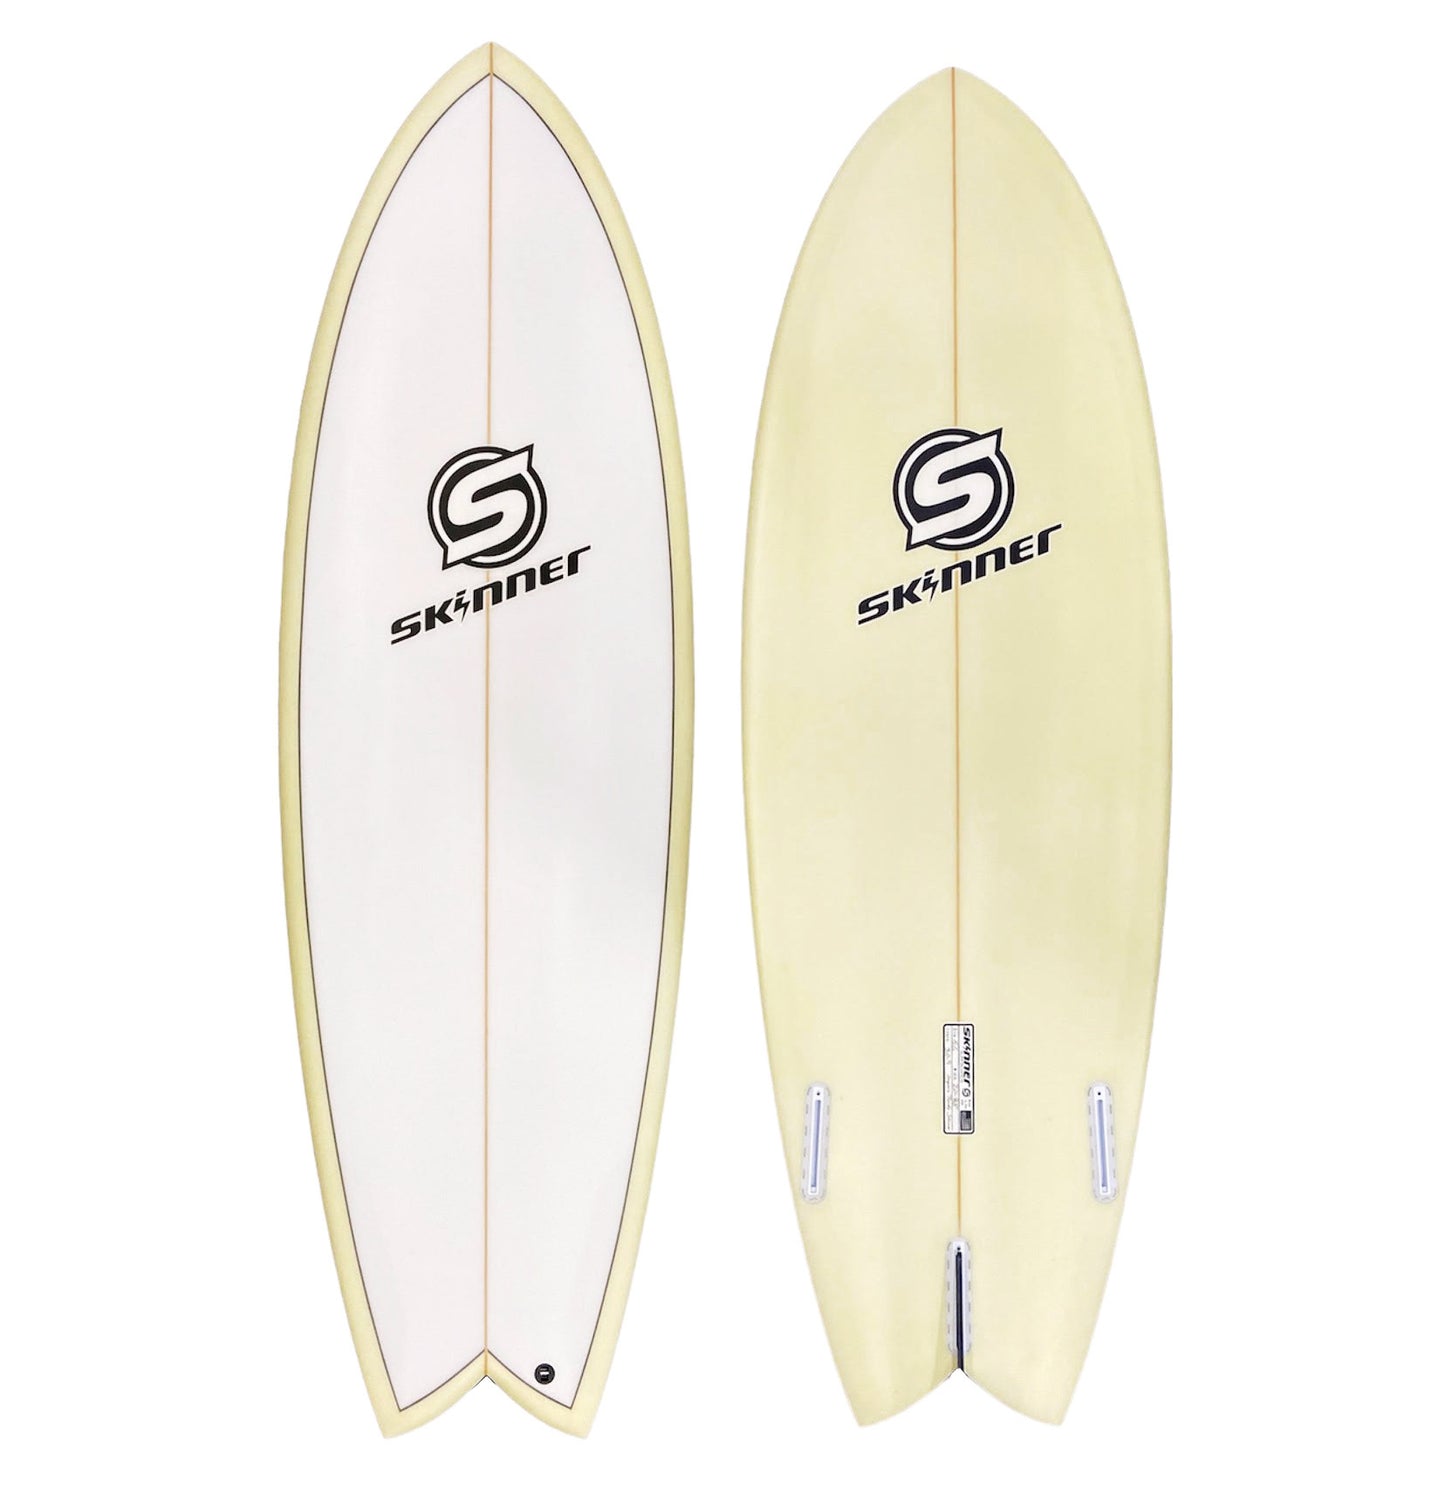 Skinner Surfboard 5'6 x 20.5" x 29.5 Liters Twin Fin + Swallow Tail Poly Color Surfboard